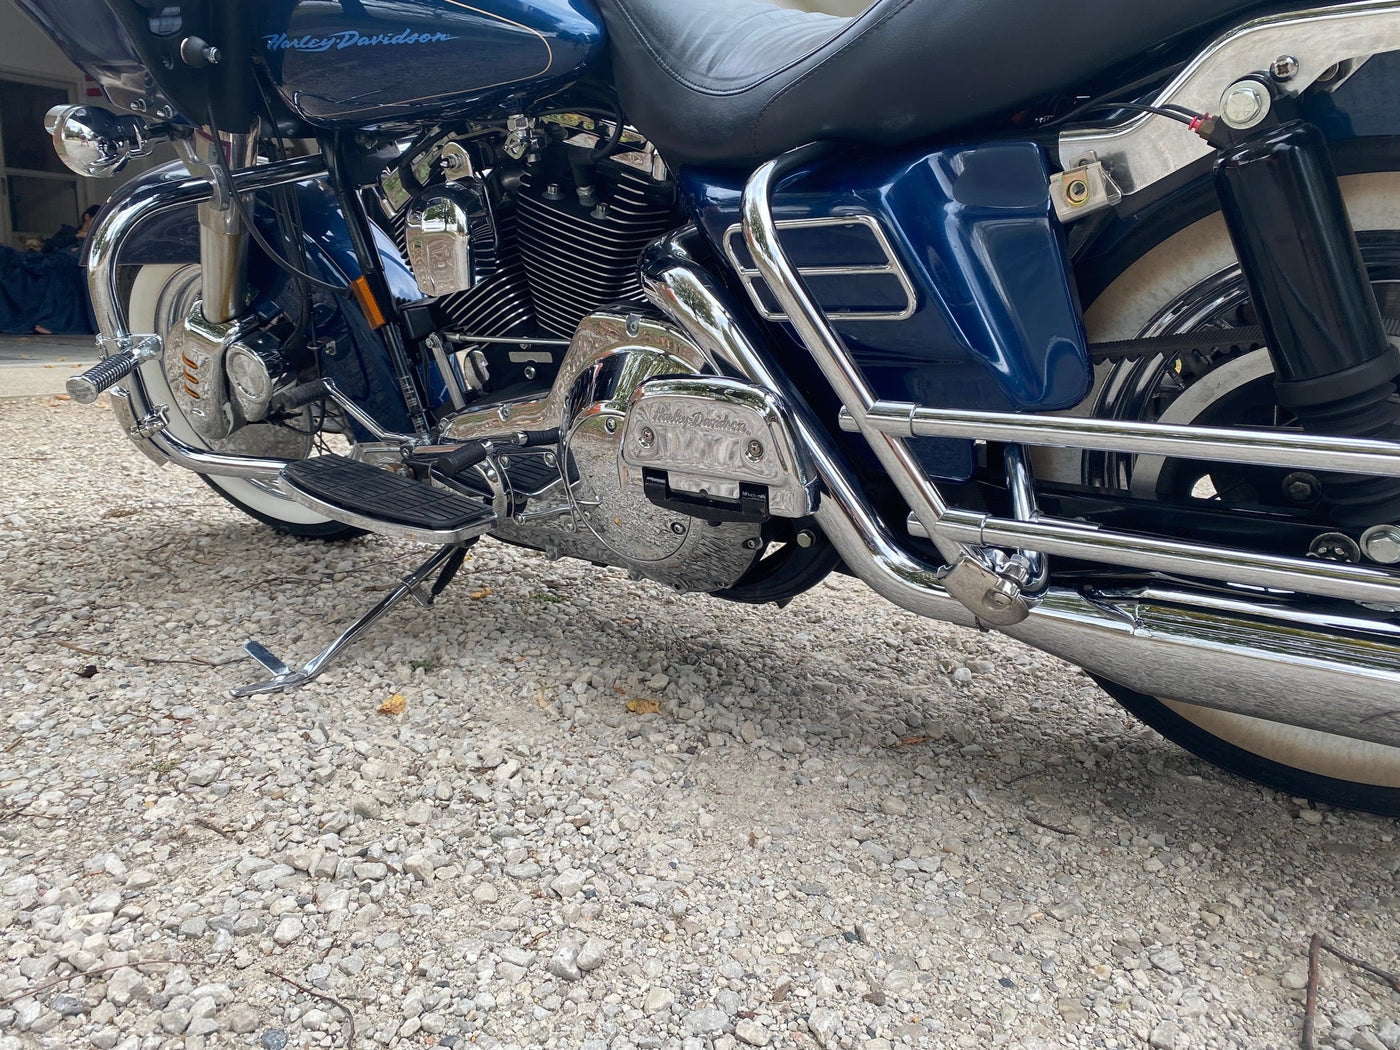 Polished Stainless Steel for Harleys - motorcycledropguards